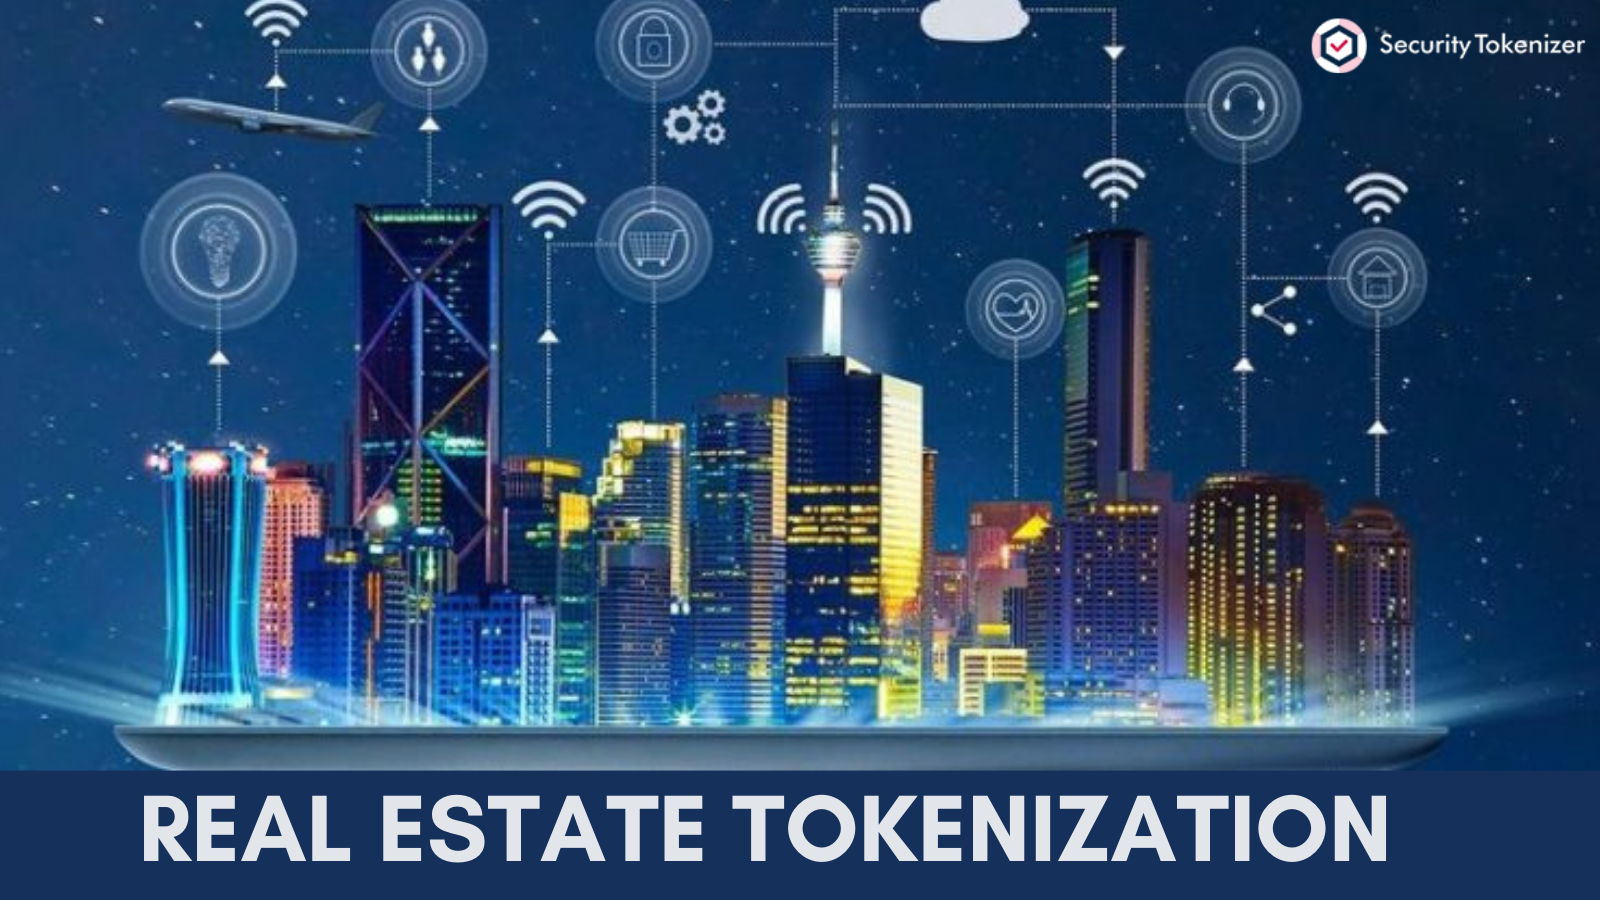 Real Estate Tokenization - An Complete Overview